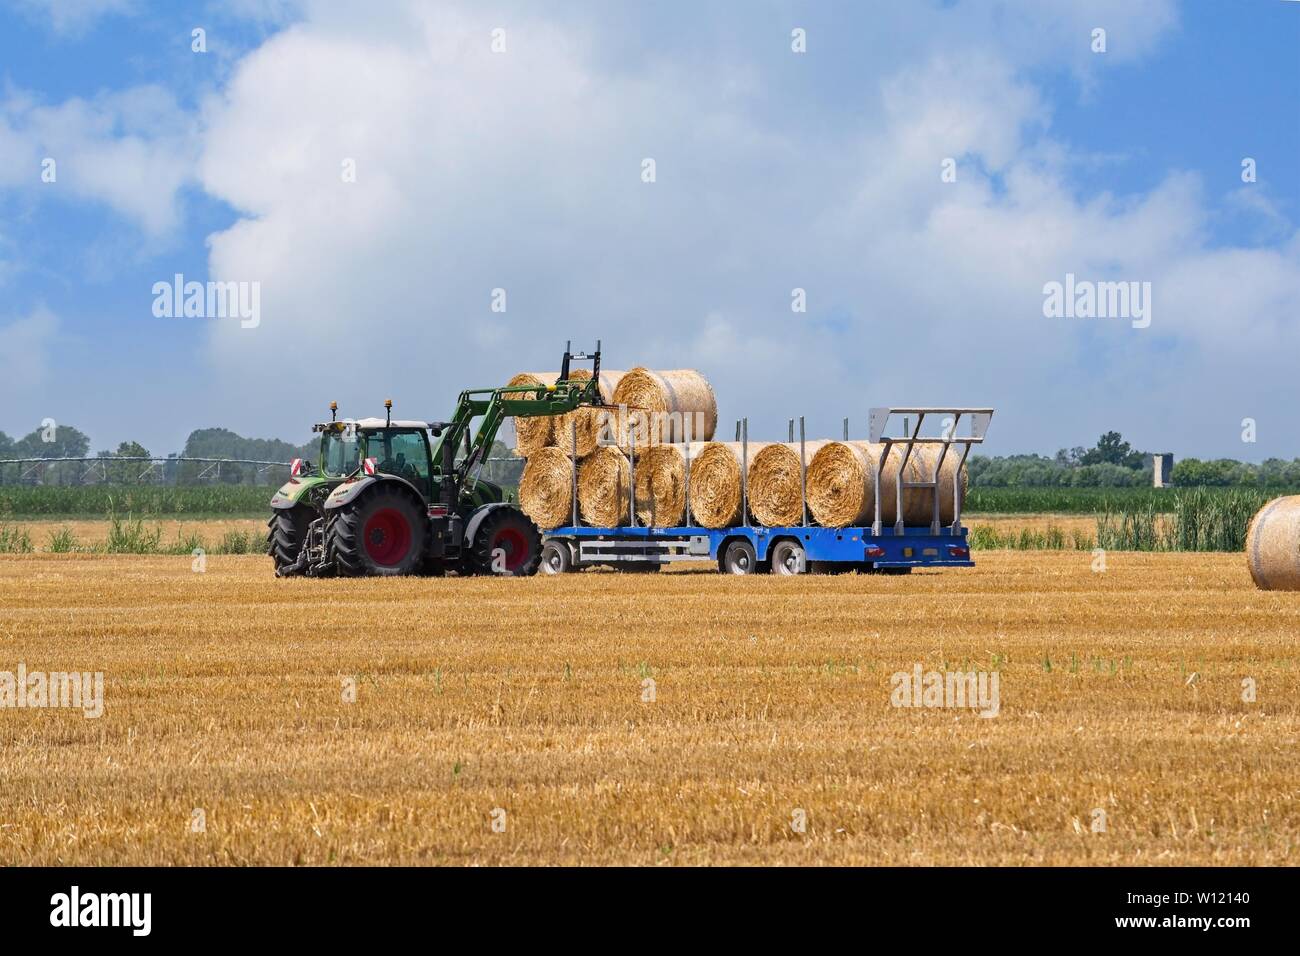 Agricultural scene, tractor loads the bales of hay on the trailer. Stock Photo